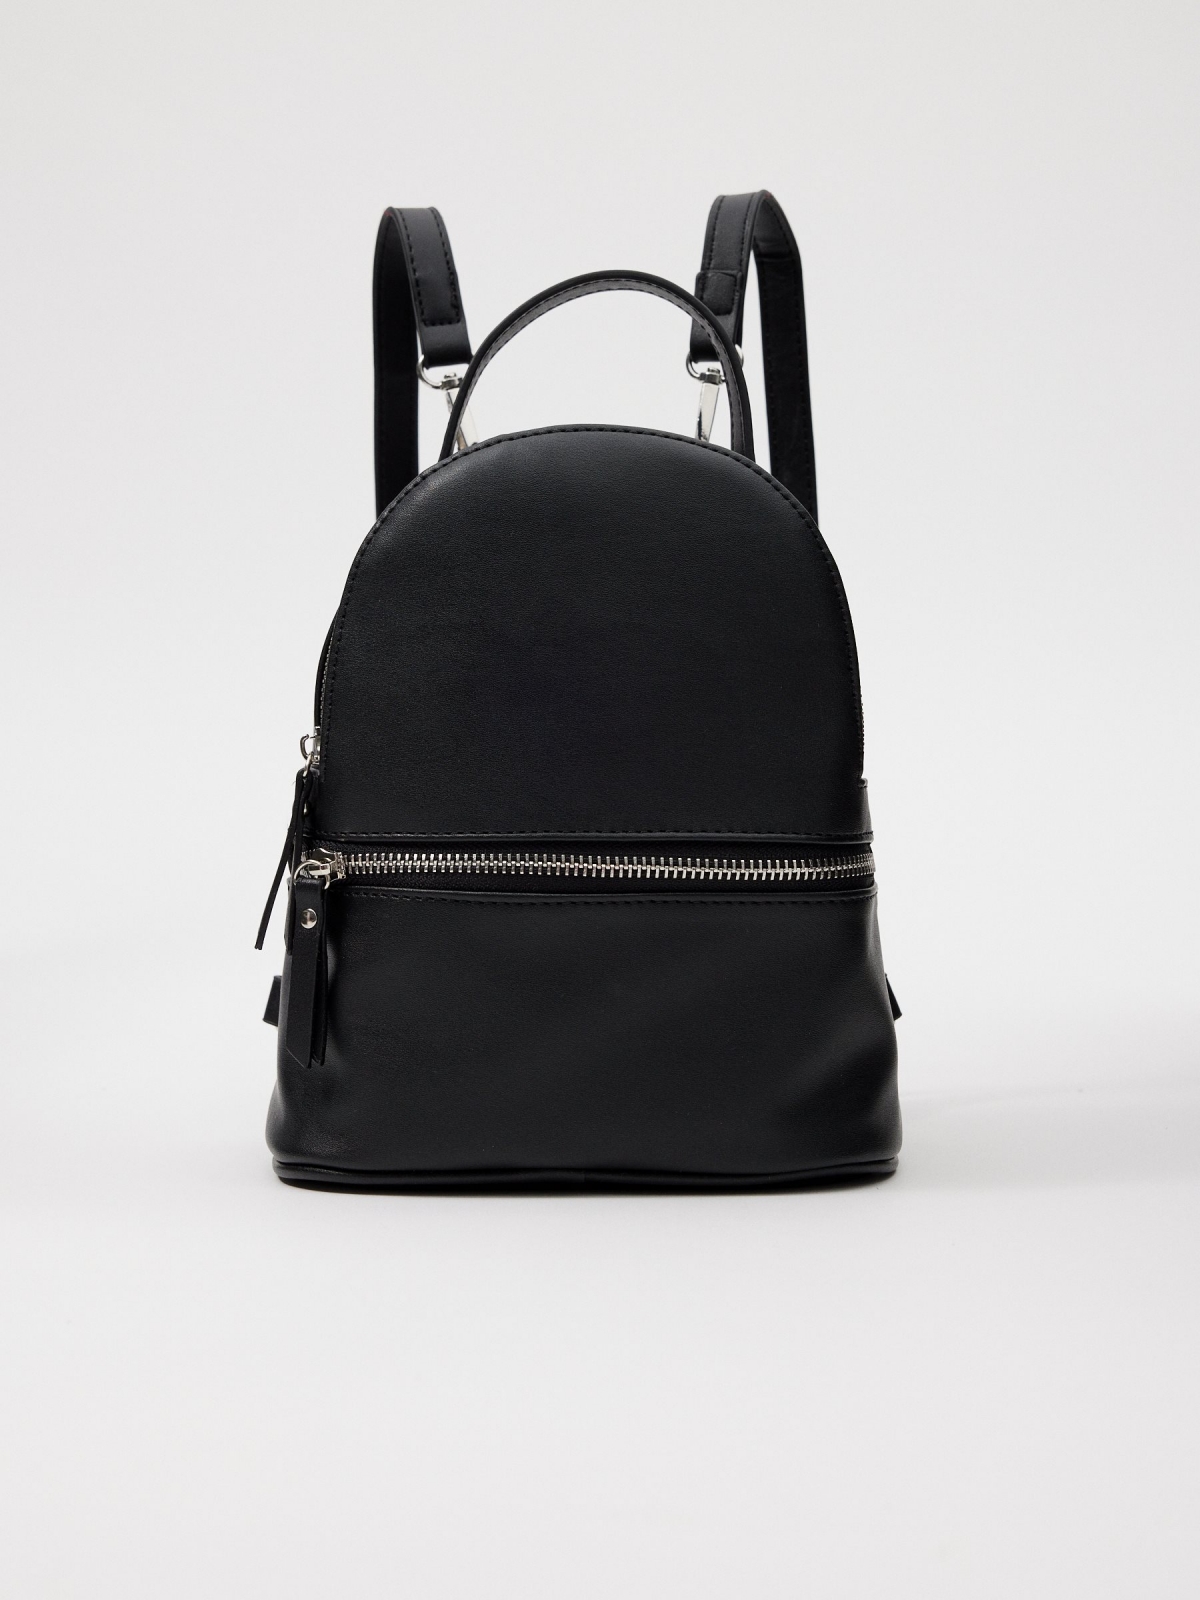 Black leatherette casual backpack